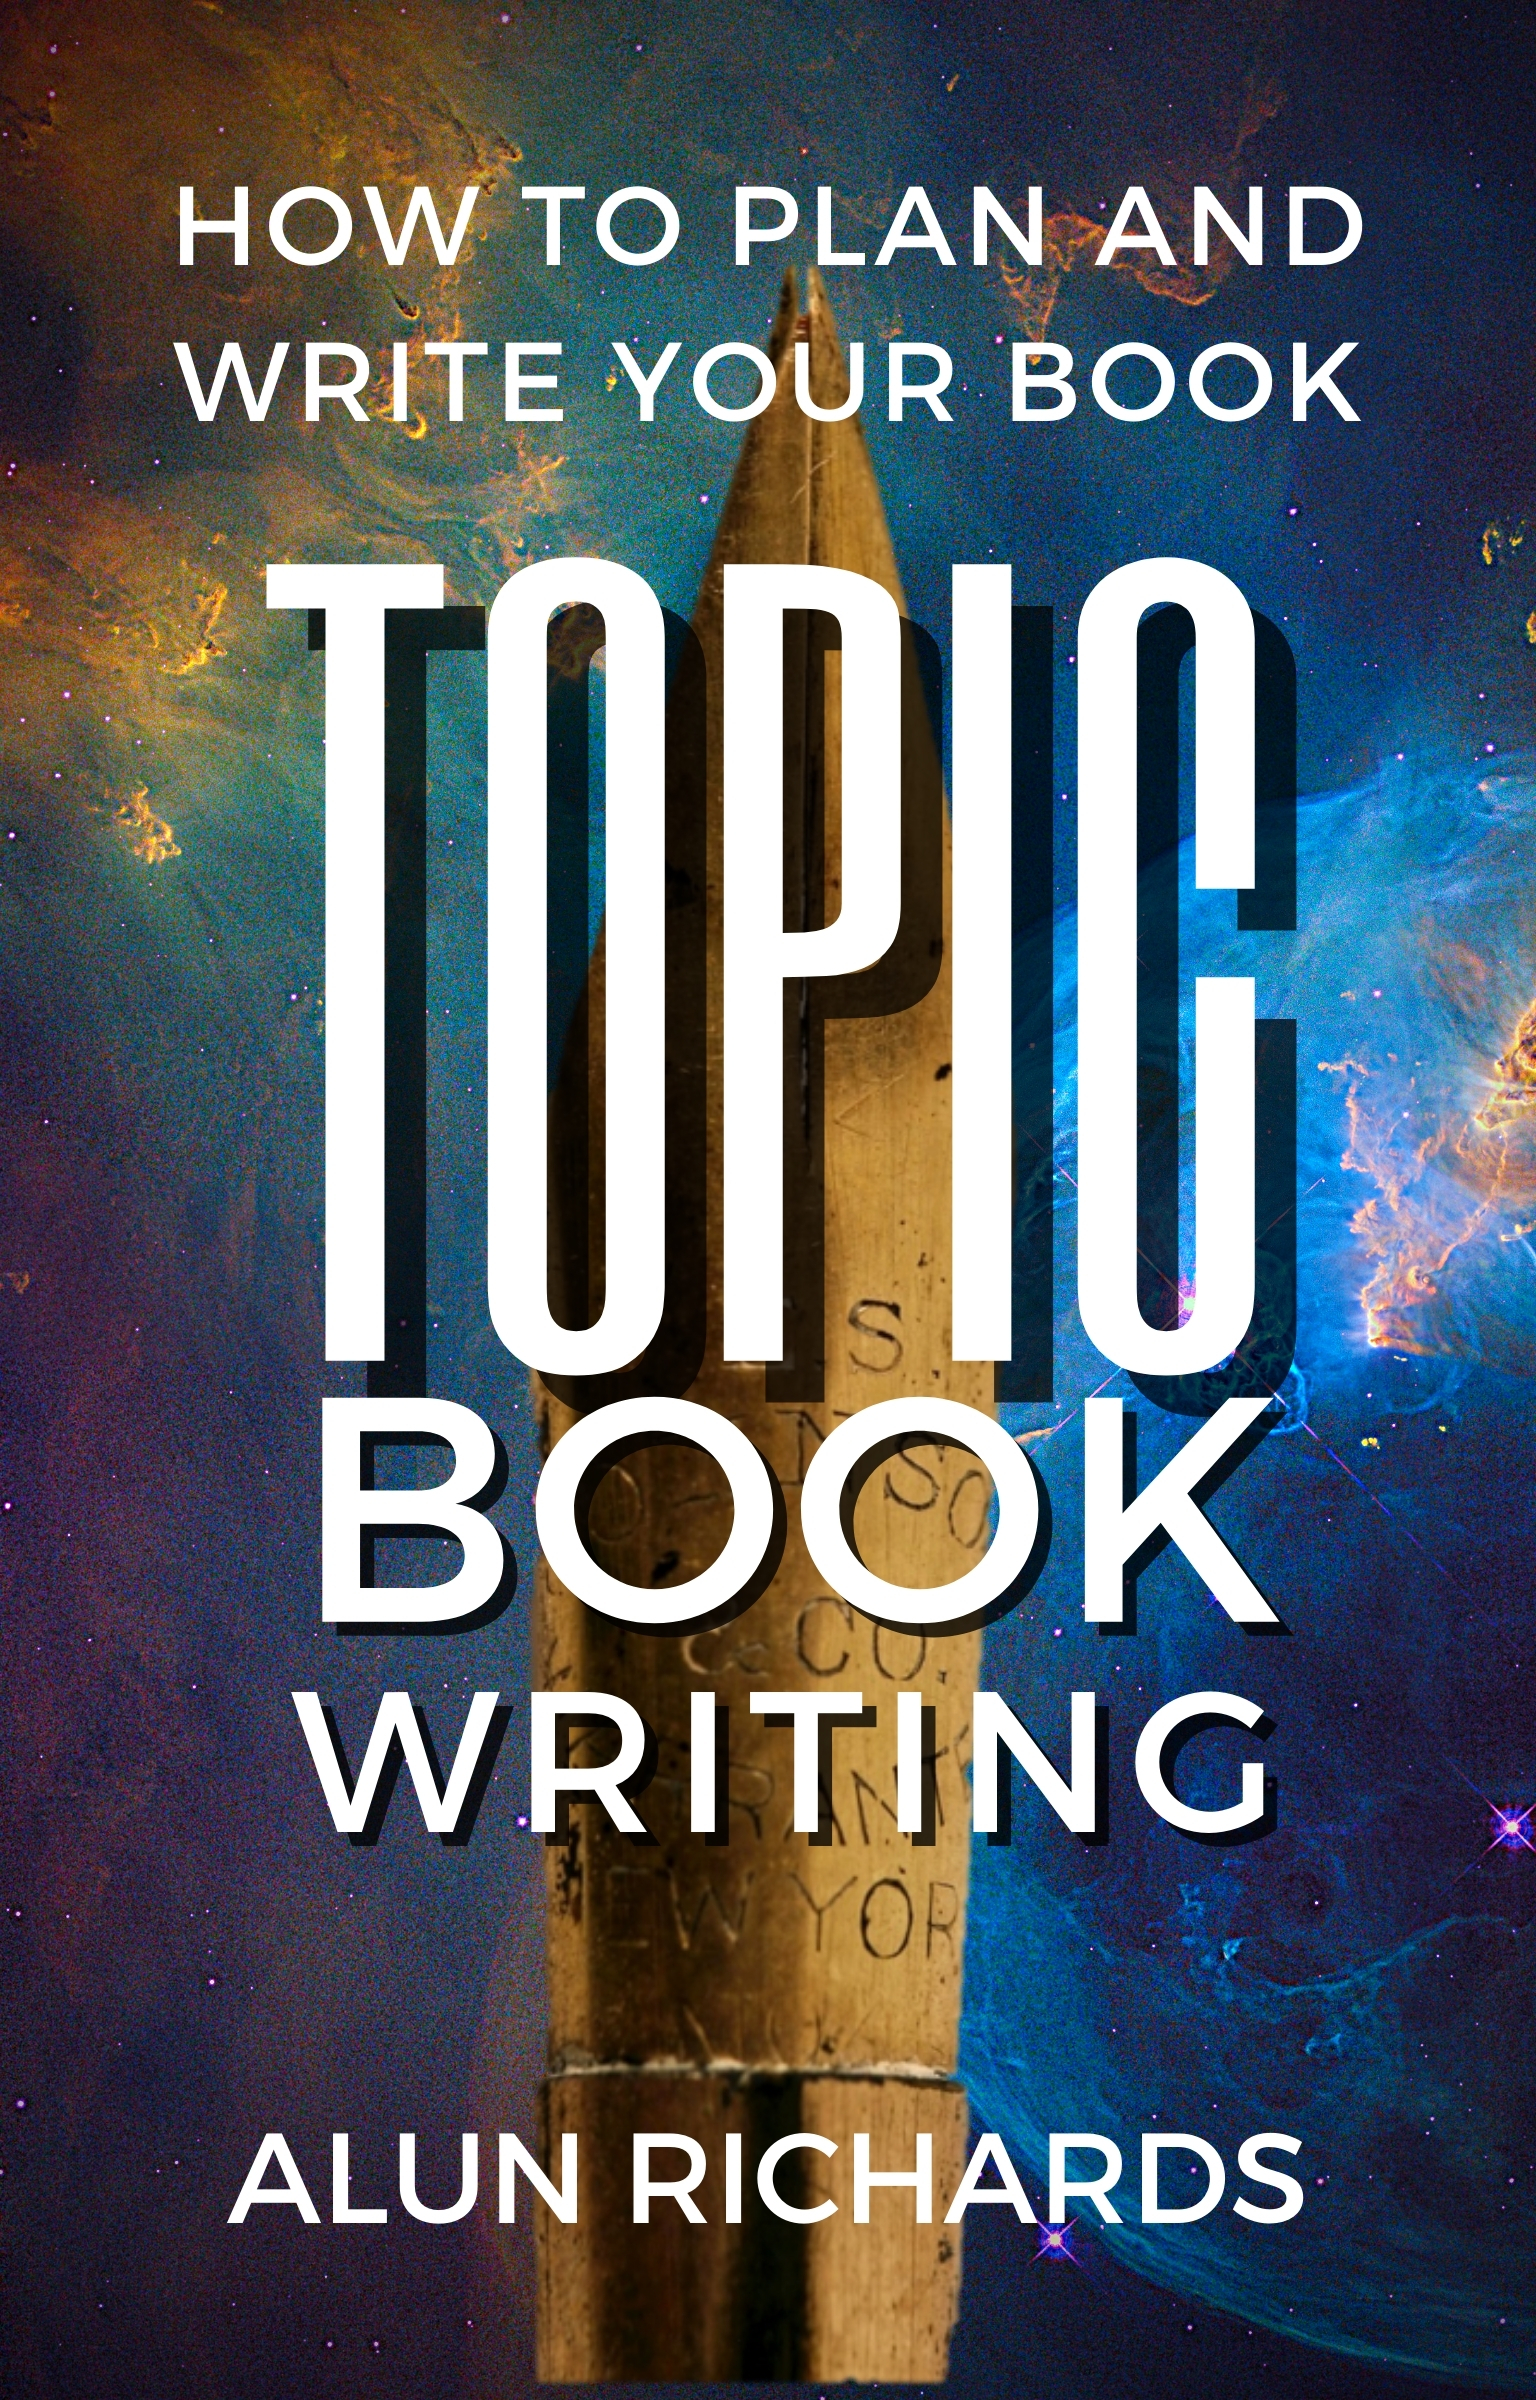 FREE: TOPIC Book Writing: How To Plan and Write Your Book by Alun Richards